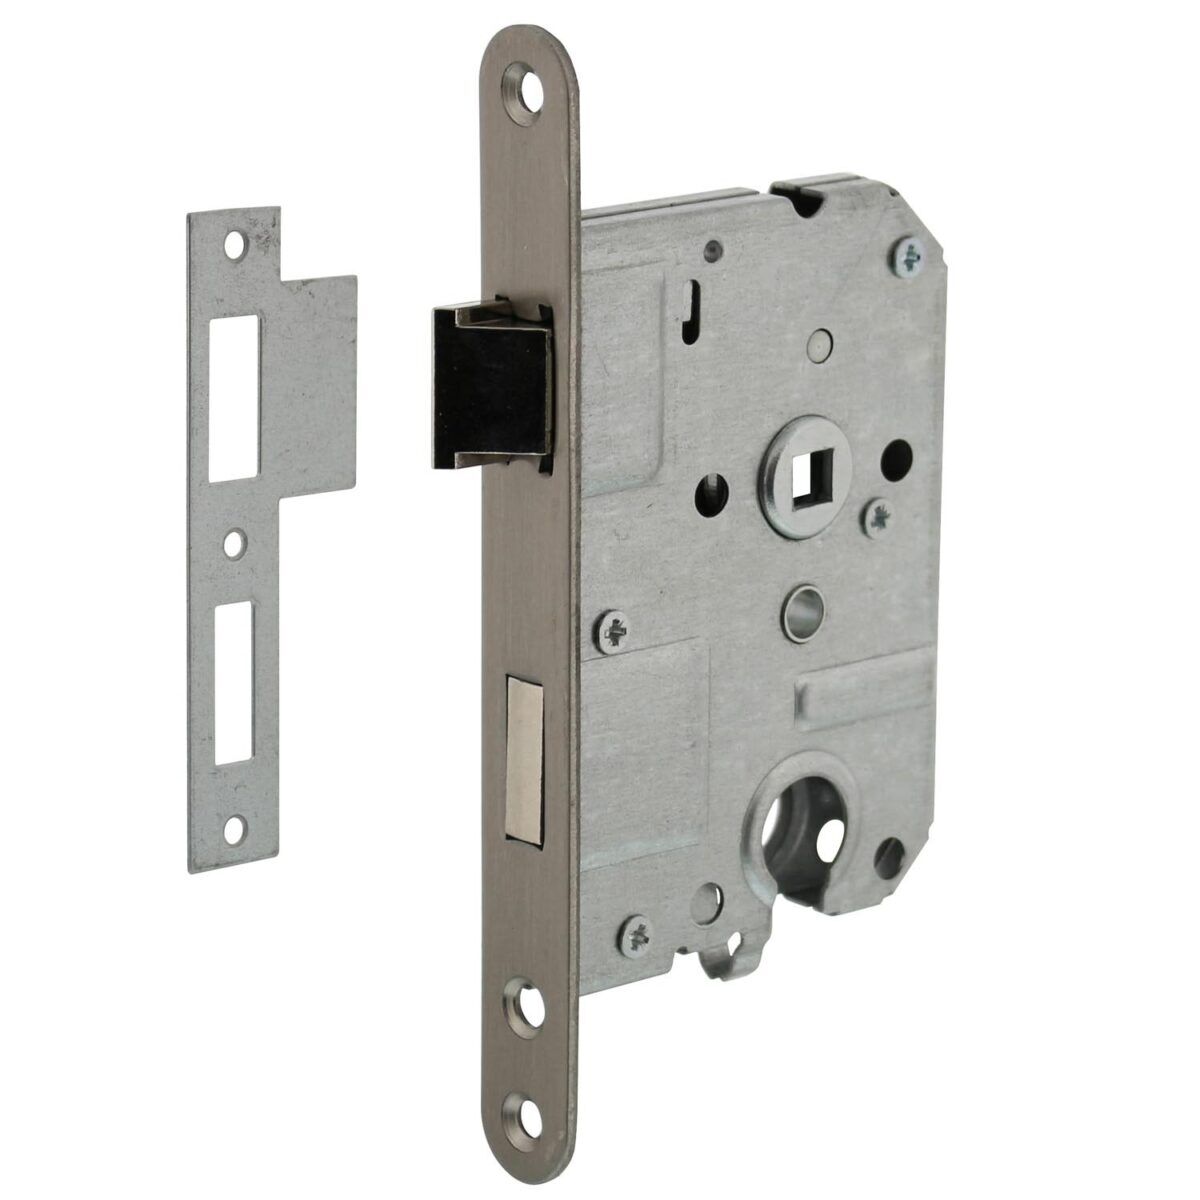 Intersteel Residential cylinder day and night lock 55 mm brushed stainless steel